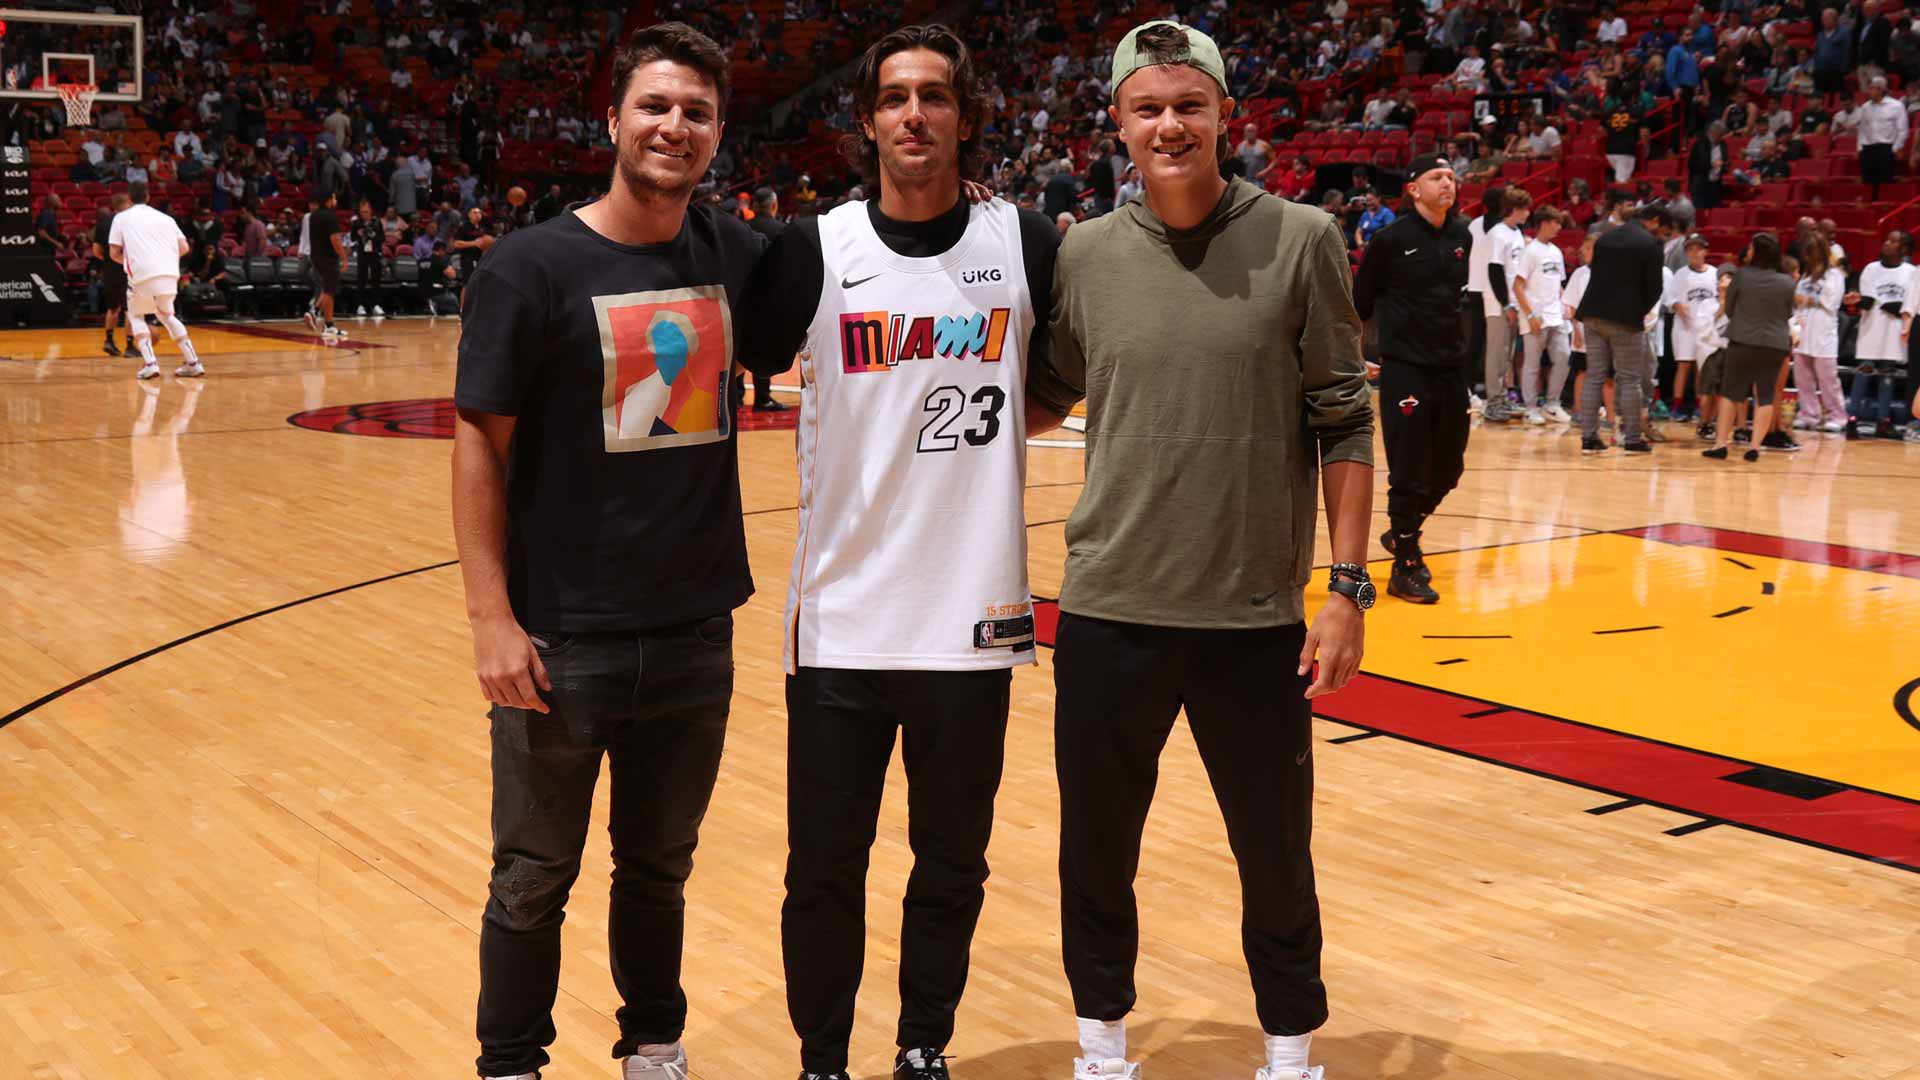 Miomir Kecmanovic, Lorenzo Musetti and Holger Rune attend Wednesday's Miami Heat game against the New York Knicks.